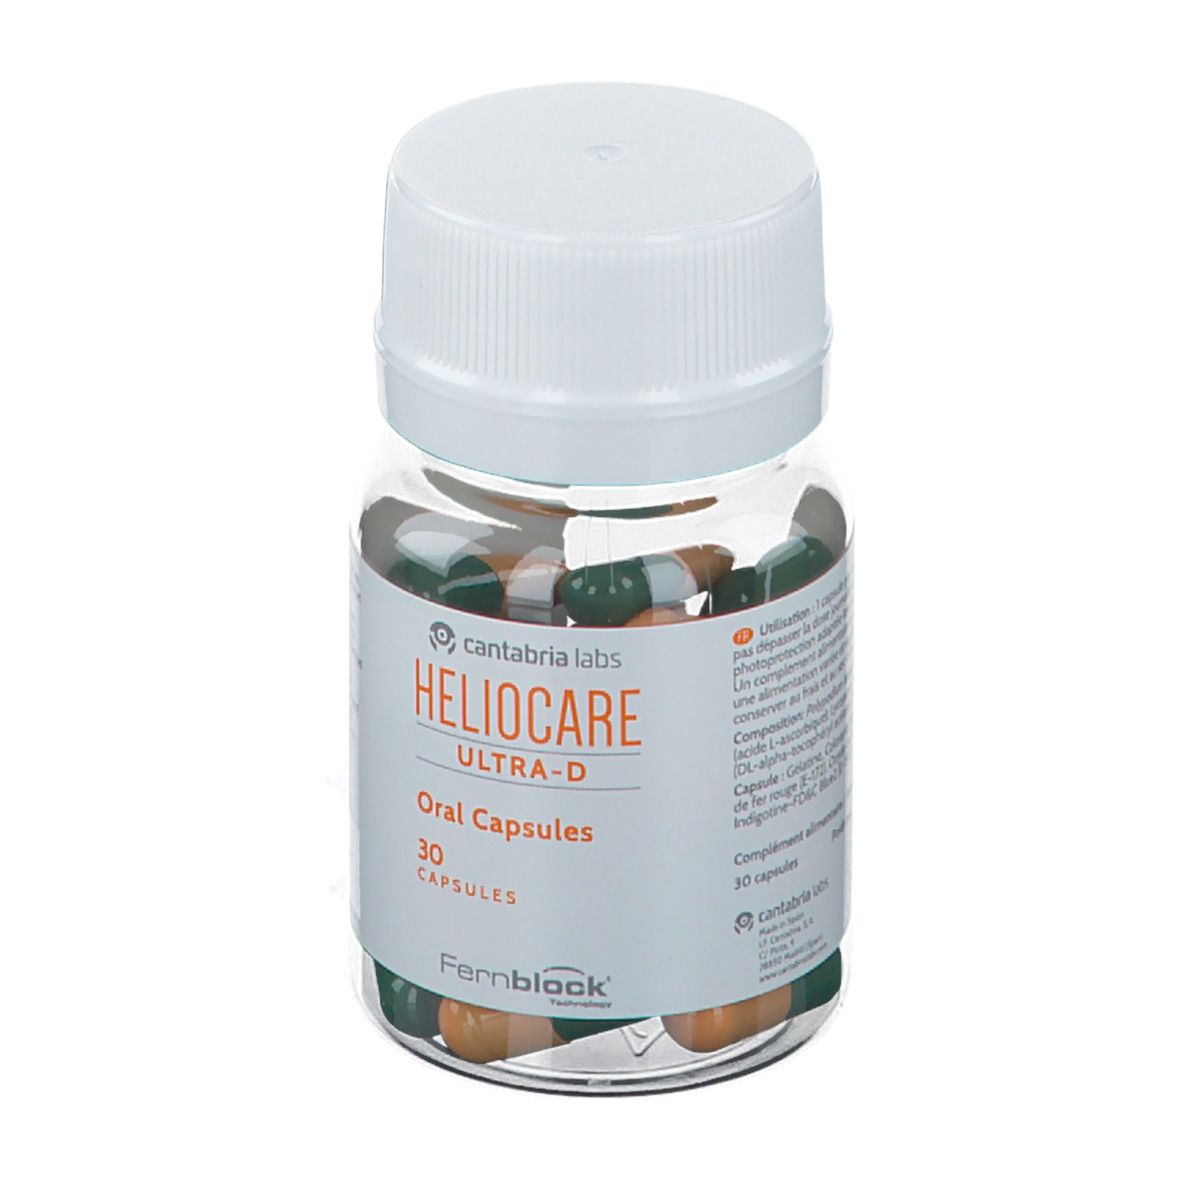 Heliocare Ultra-D Capsules